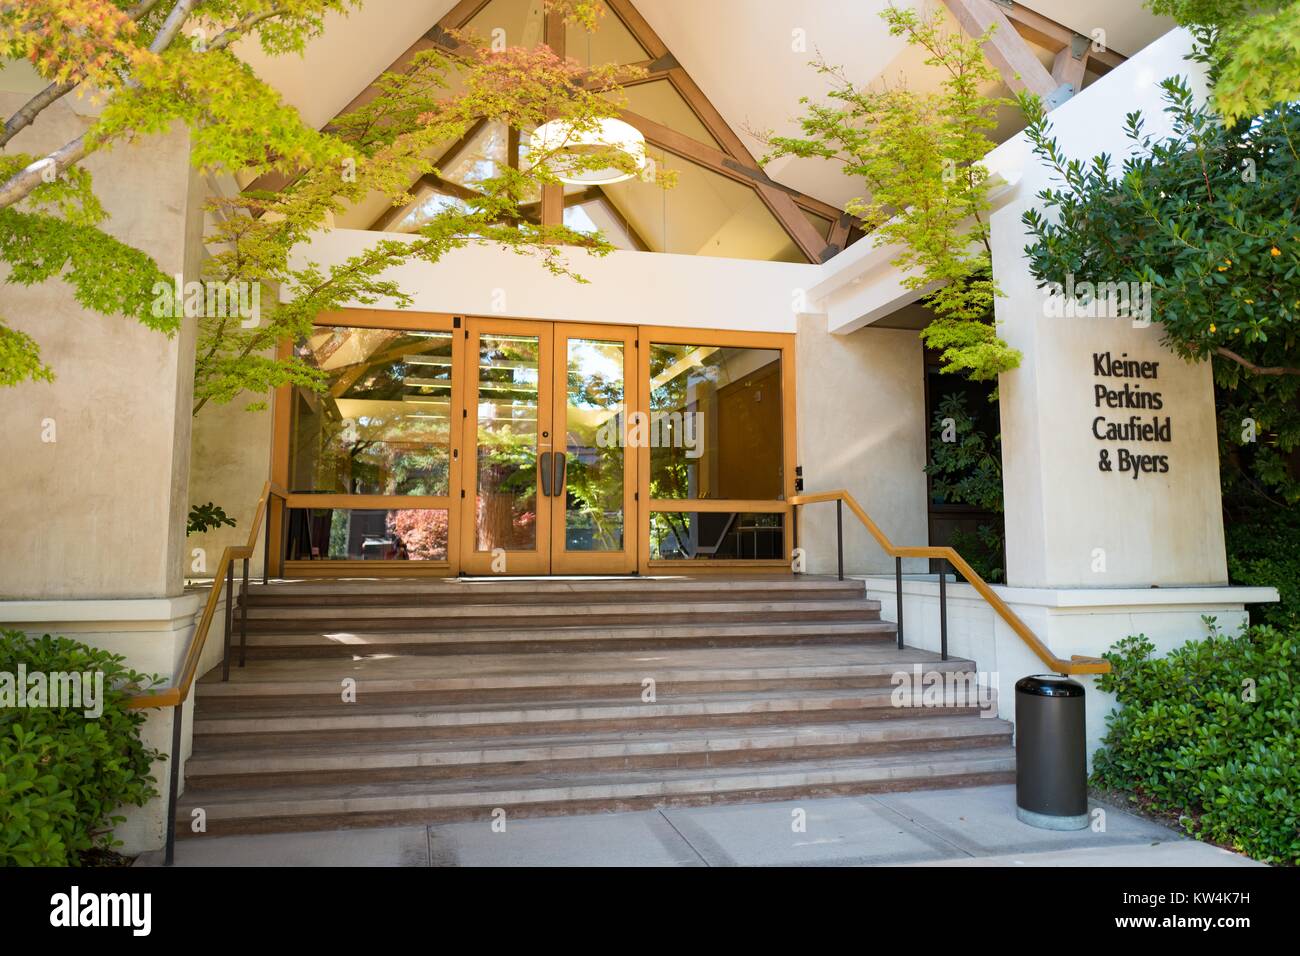 Headquarters of venture capital investment firm Kleiner Perkins Caufield Byers, on Sand Hill Road in the Silicon Valley town of Menlo Park, California, August 25, 2016. Stock Photo